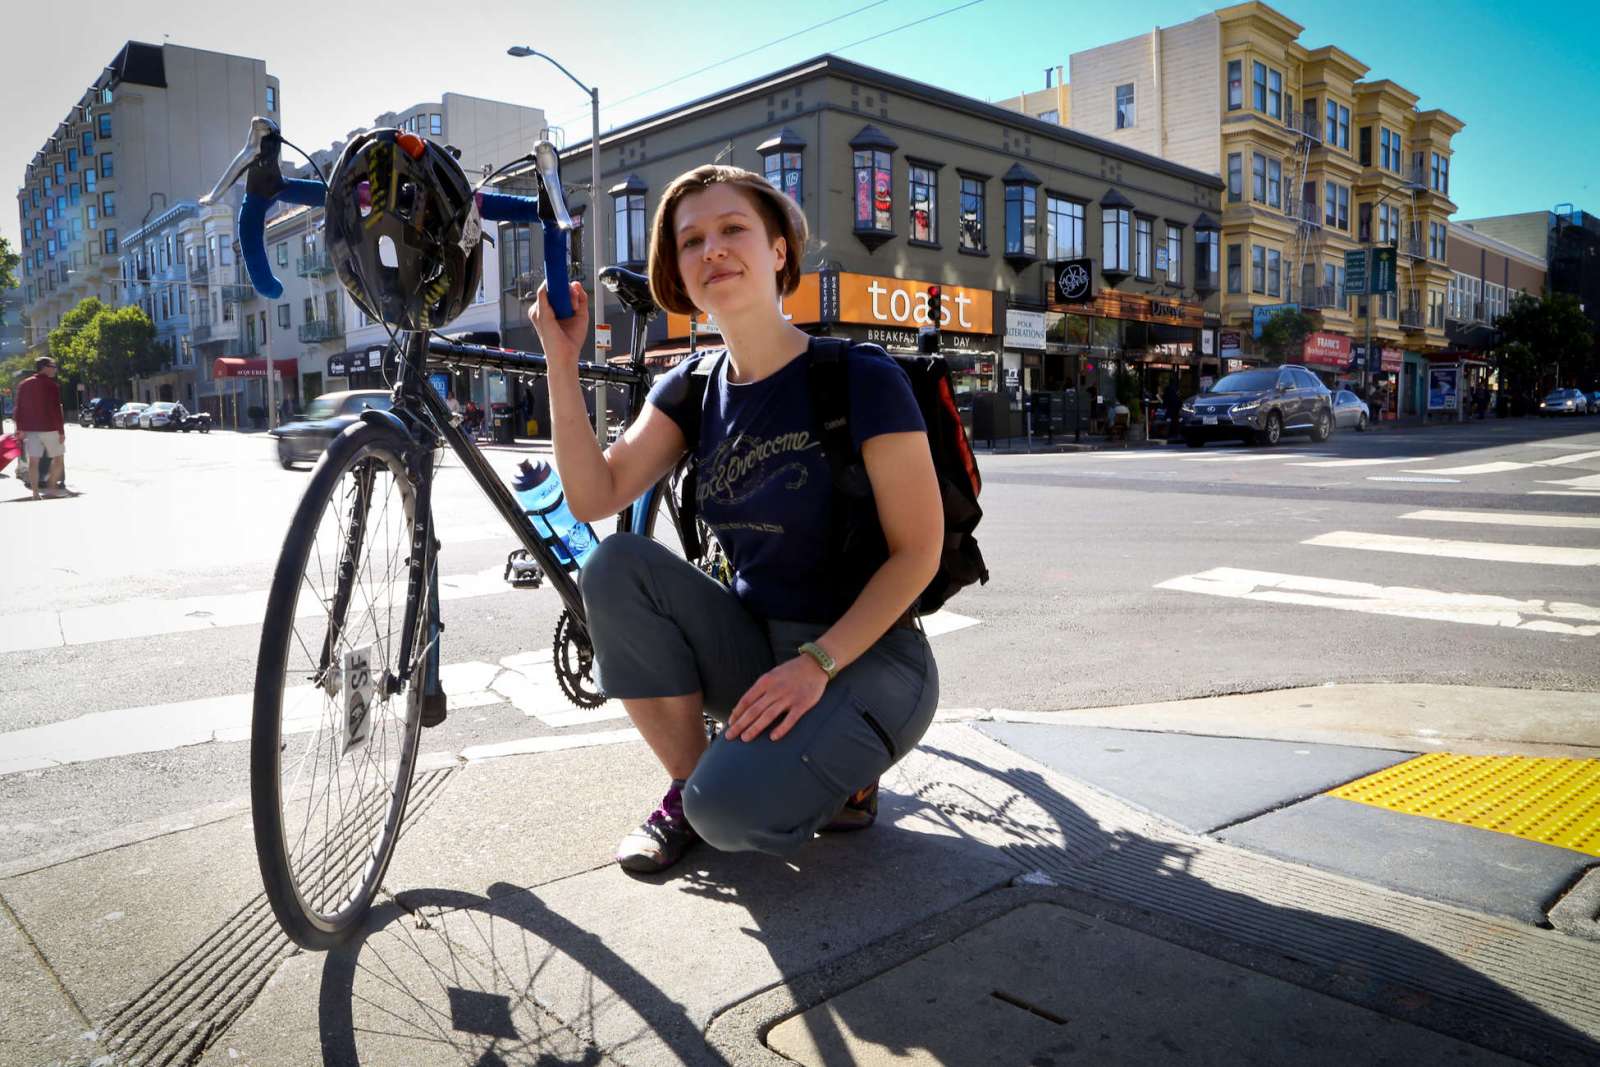 Bicyclists' Portraits of Survival